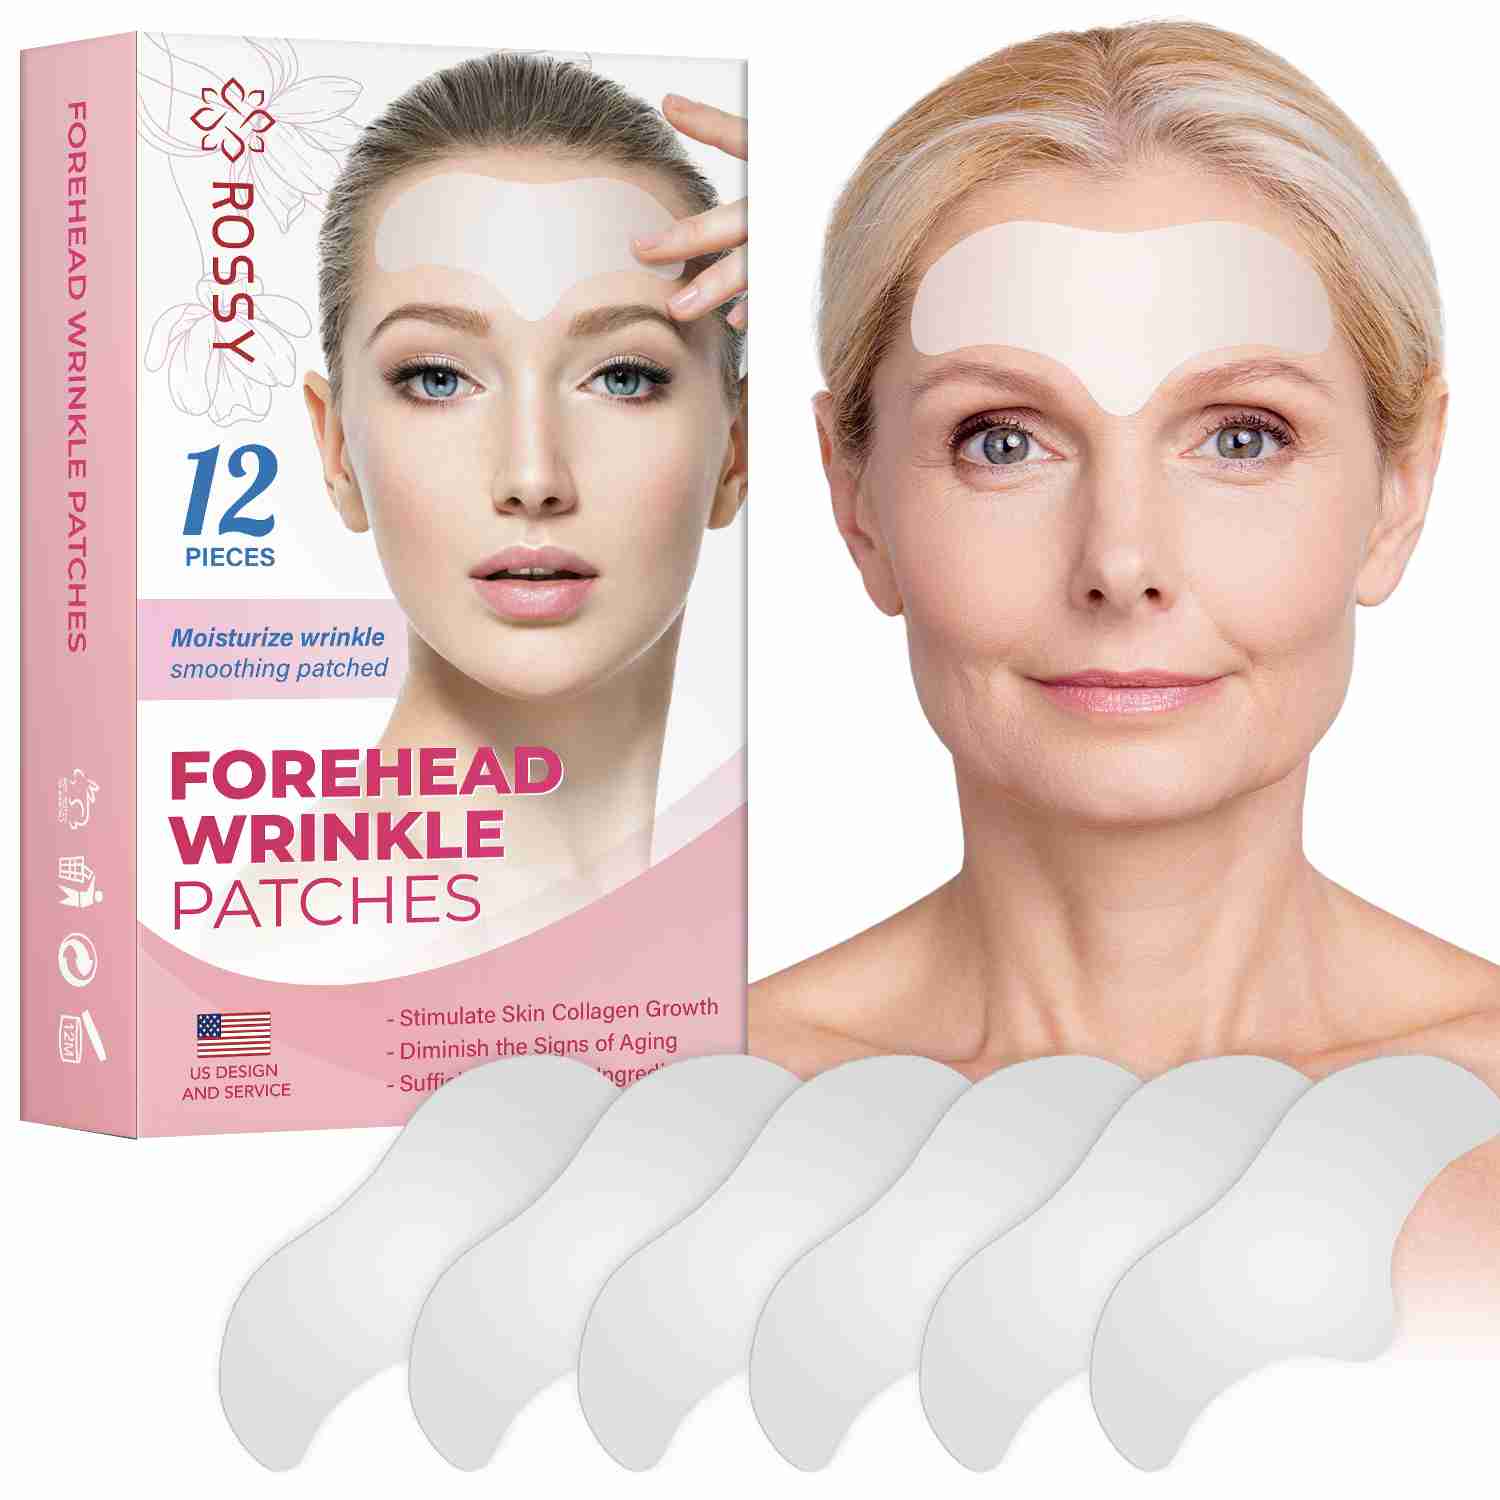 forehead-wrinkle-patches with cash back rebate